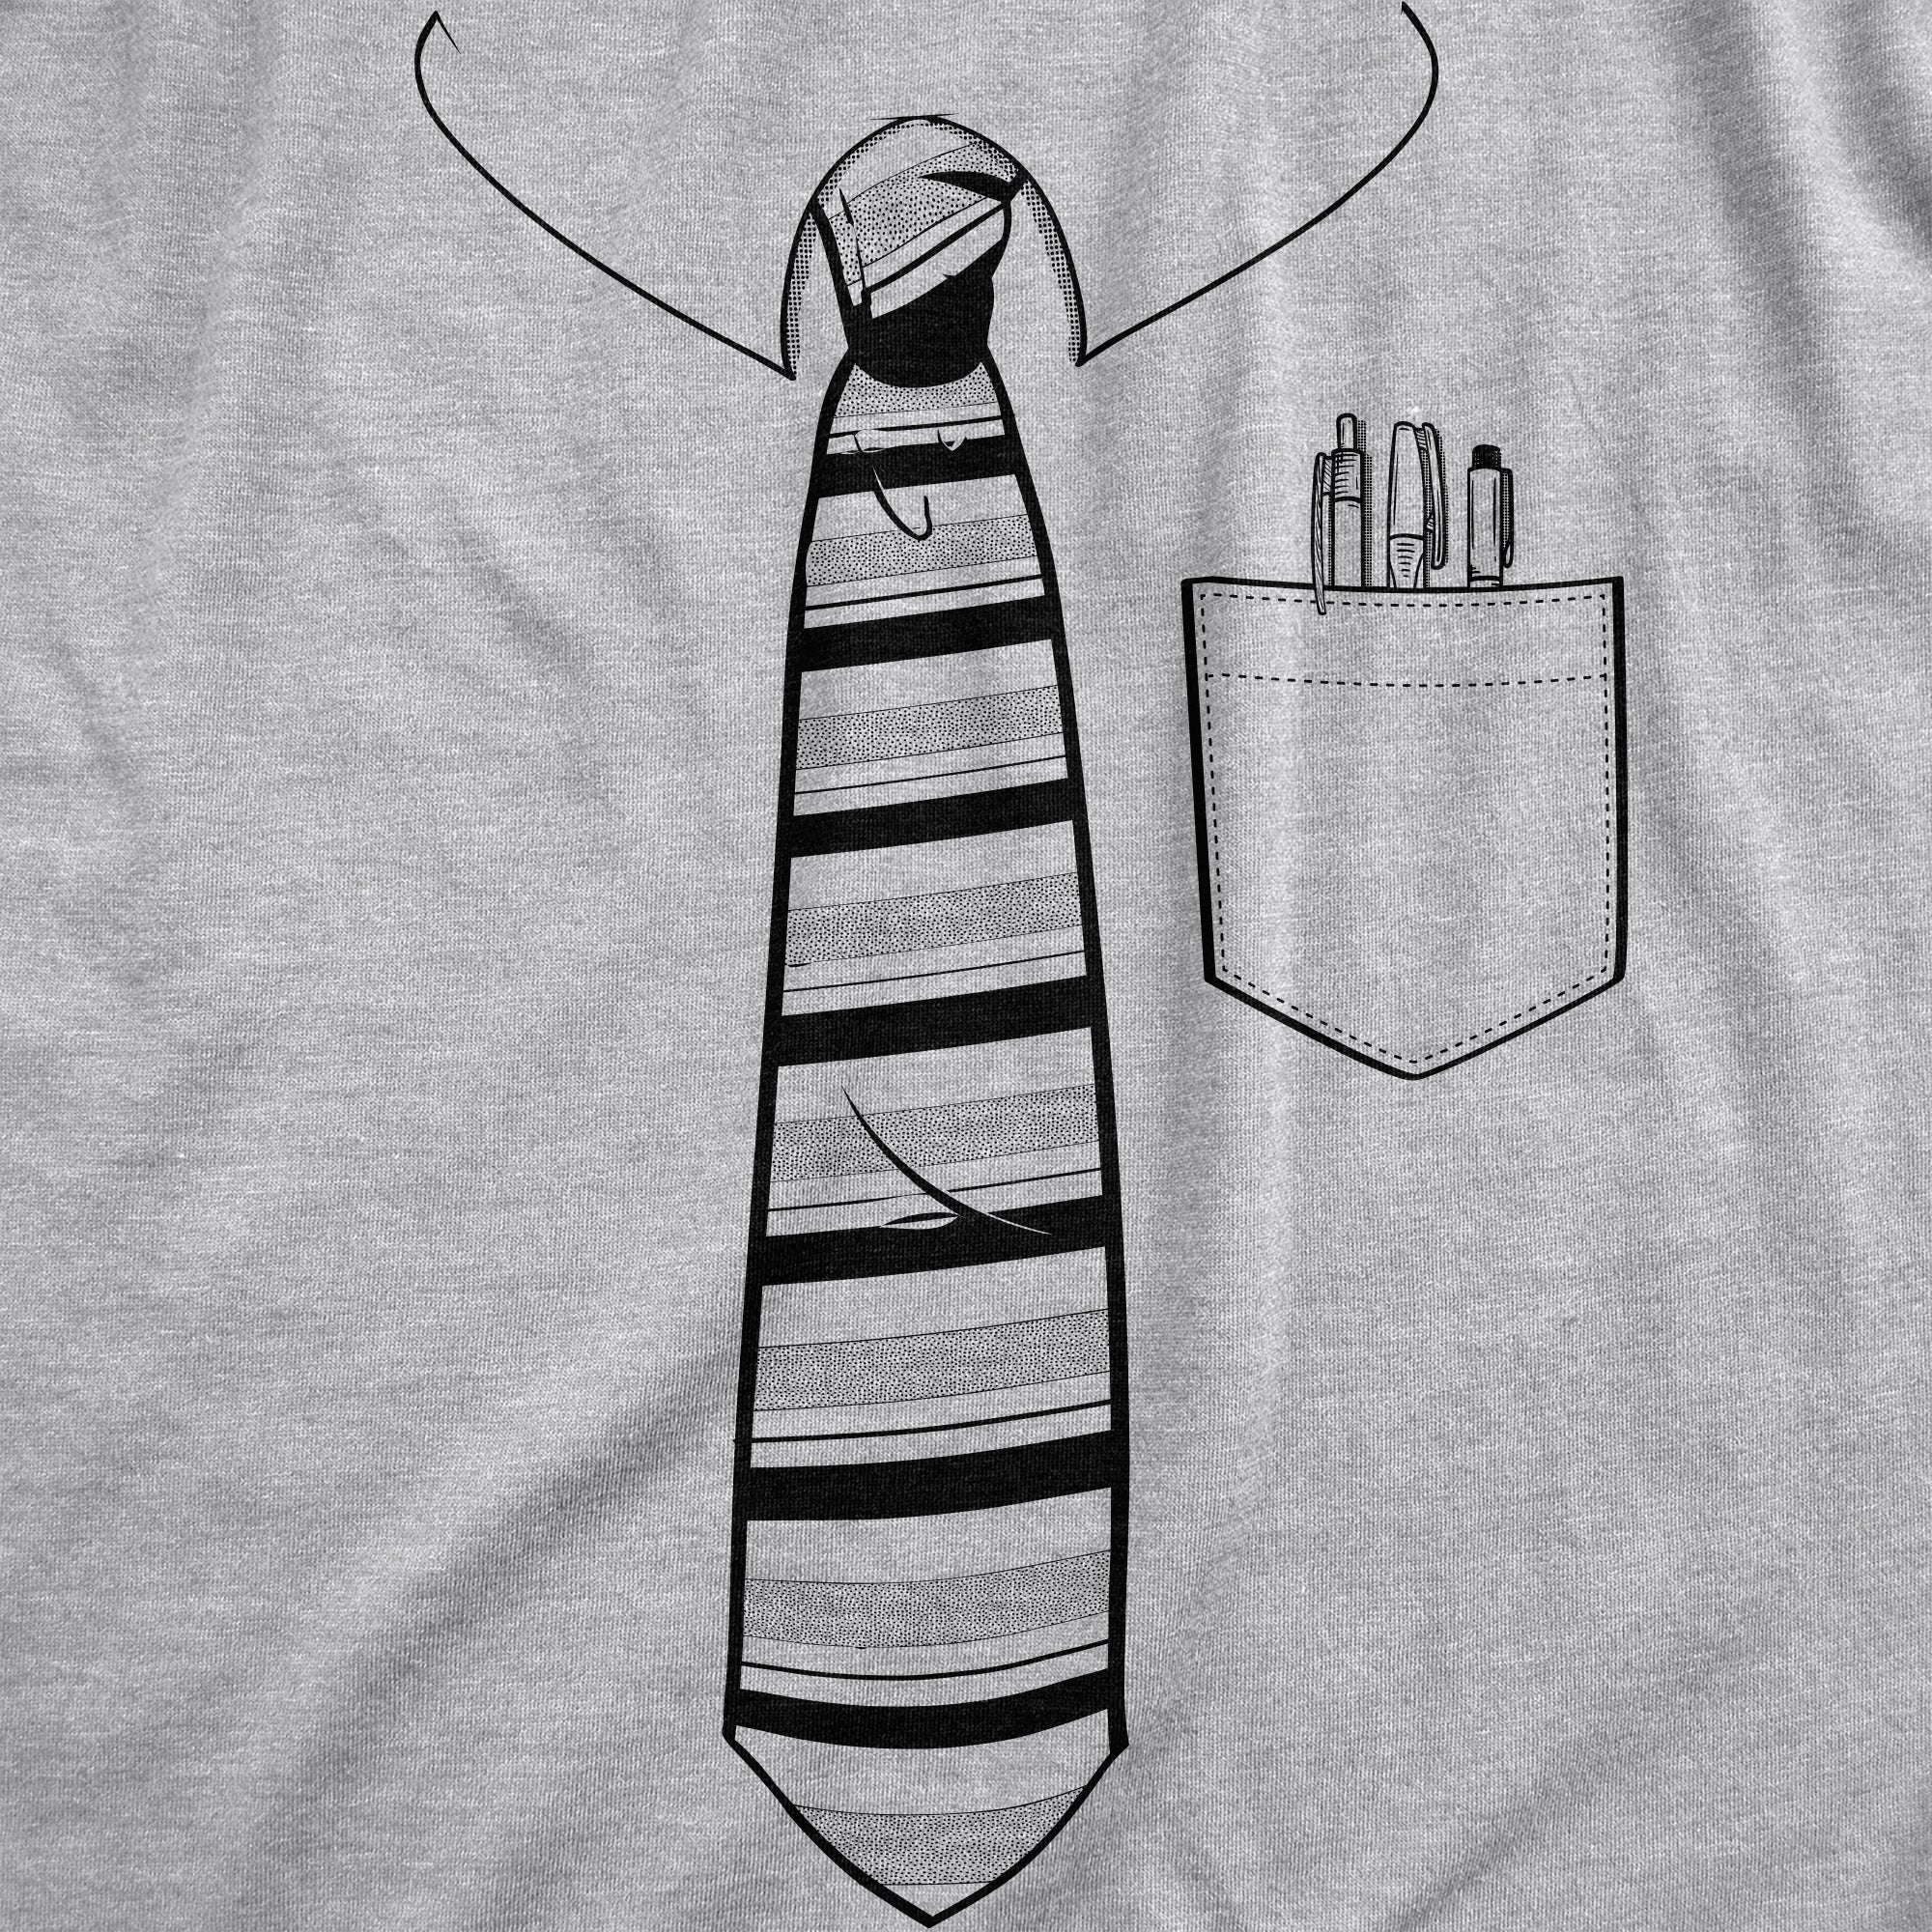 Funny Light Heather Grey - TIE Tie With Pocket Of Pens Womens T Shirt Nerdy Office sarcastic Tee